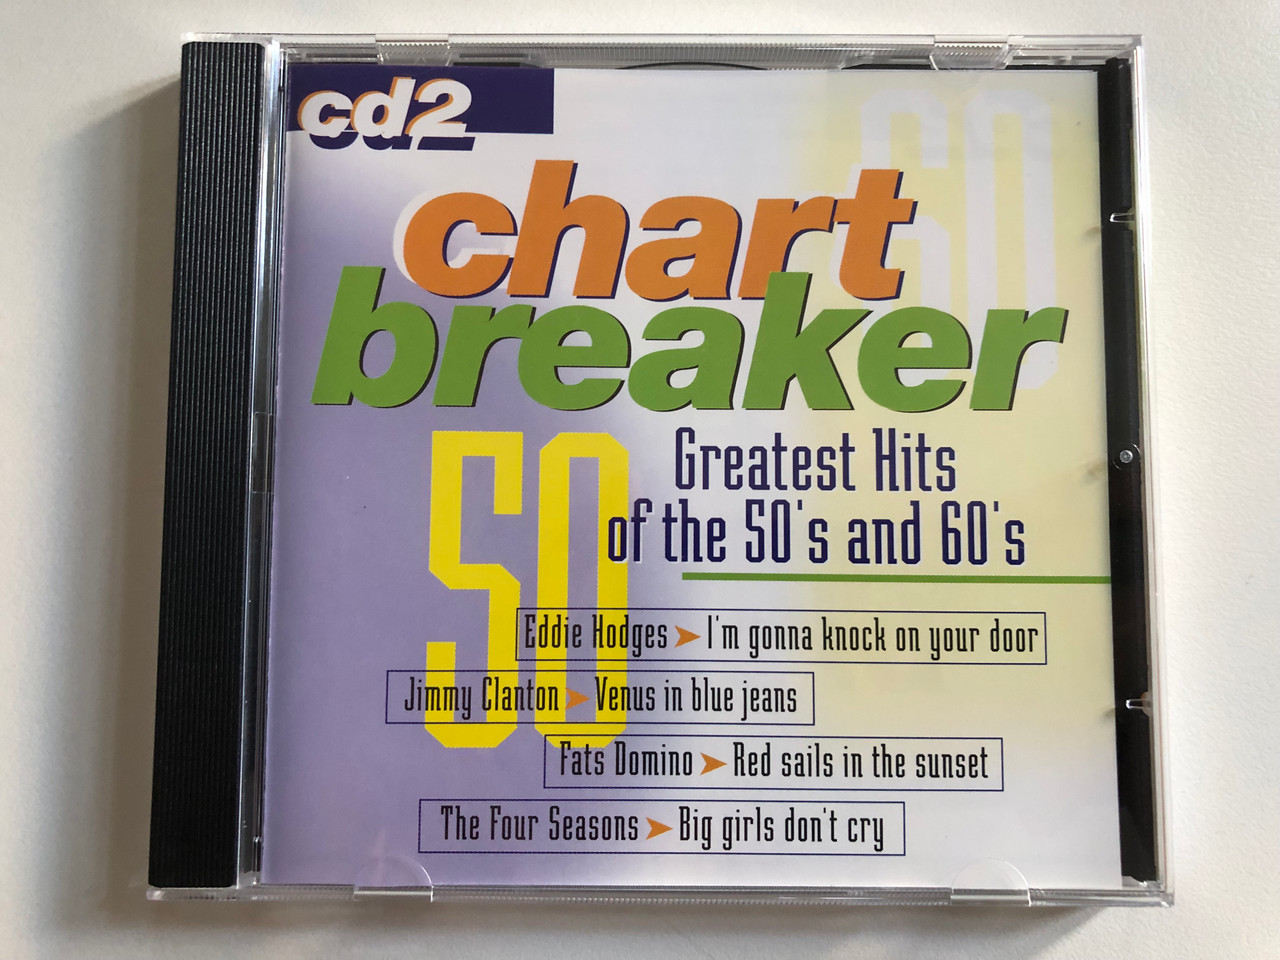 https://cdn10.bigcommerce.com/s-62bdpkt7pb/products/0/images/313468/Chart_Breaker_Greatest_Hits_Of_The_50s_And_60s_CD_2_-_Eddie_Hodges_-_Im_Gonna_Knock_On_Your_Door_Jimmy_Clanton_-_Venus_In_Blue_Jeans_Fats_Domino_-_Red_Sails_In_The_Sunset_The_Four_S_1__45450.1700840380.1280.1280.JPG?c=2